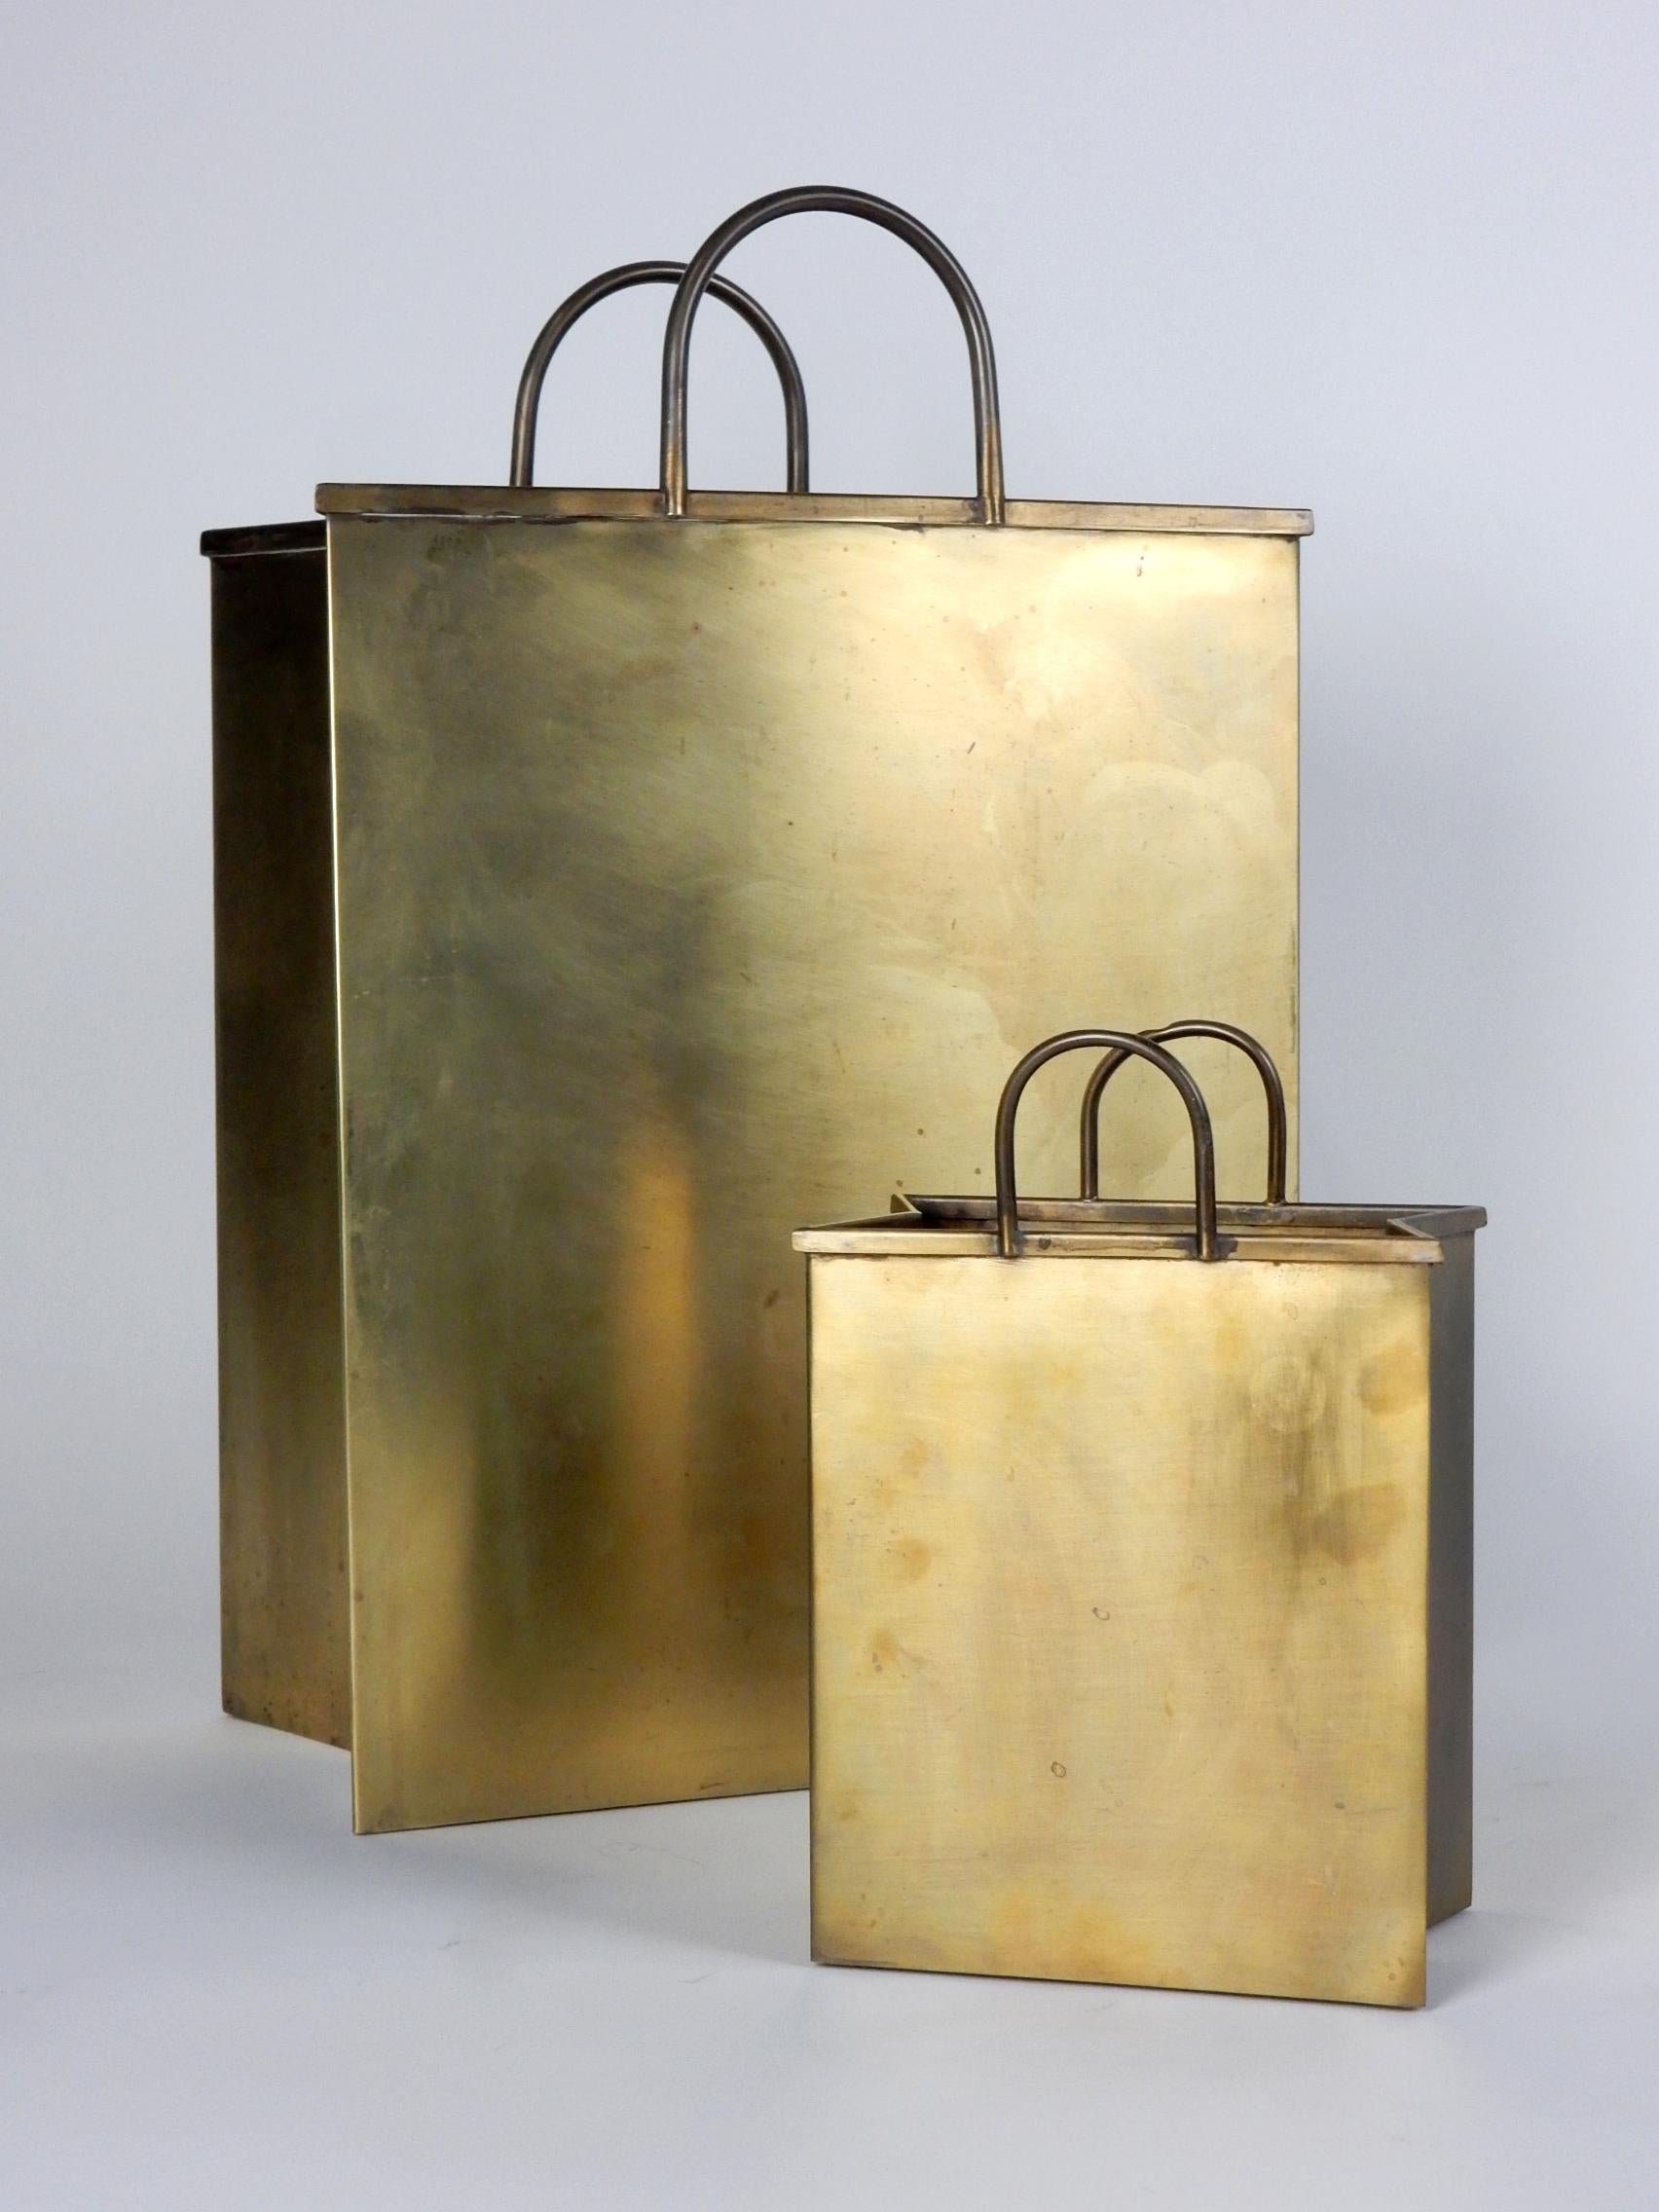 Rare set of brass shopping bags from Italy, circa 1960.
Both are stamped 